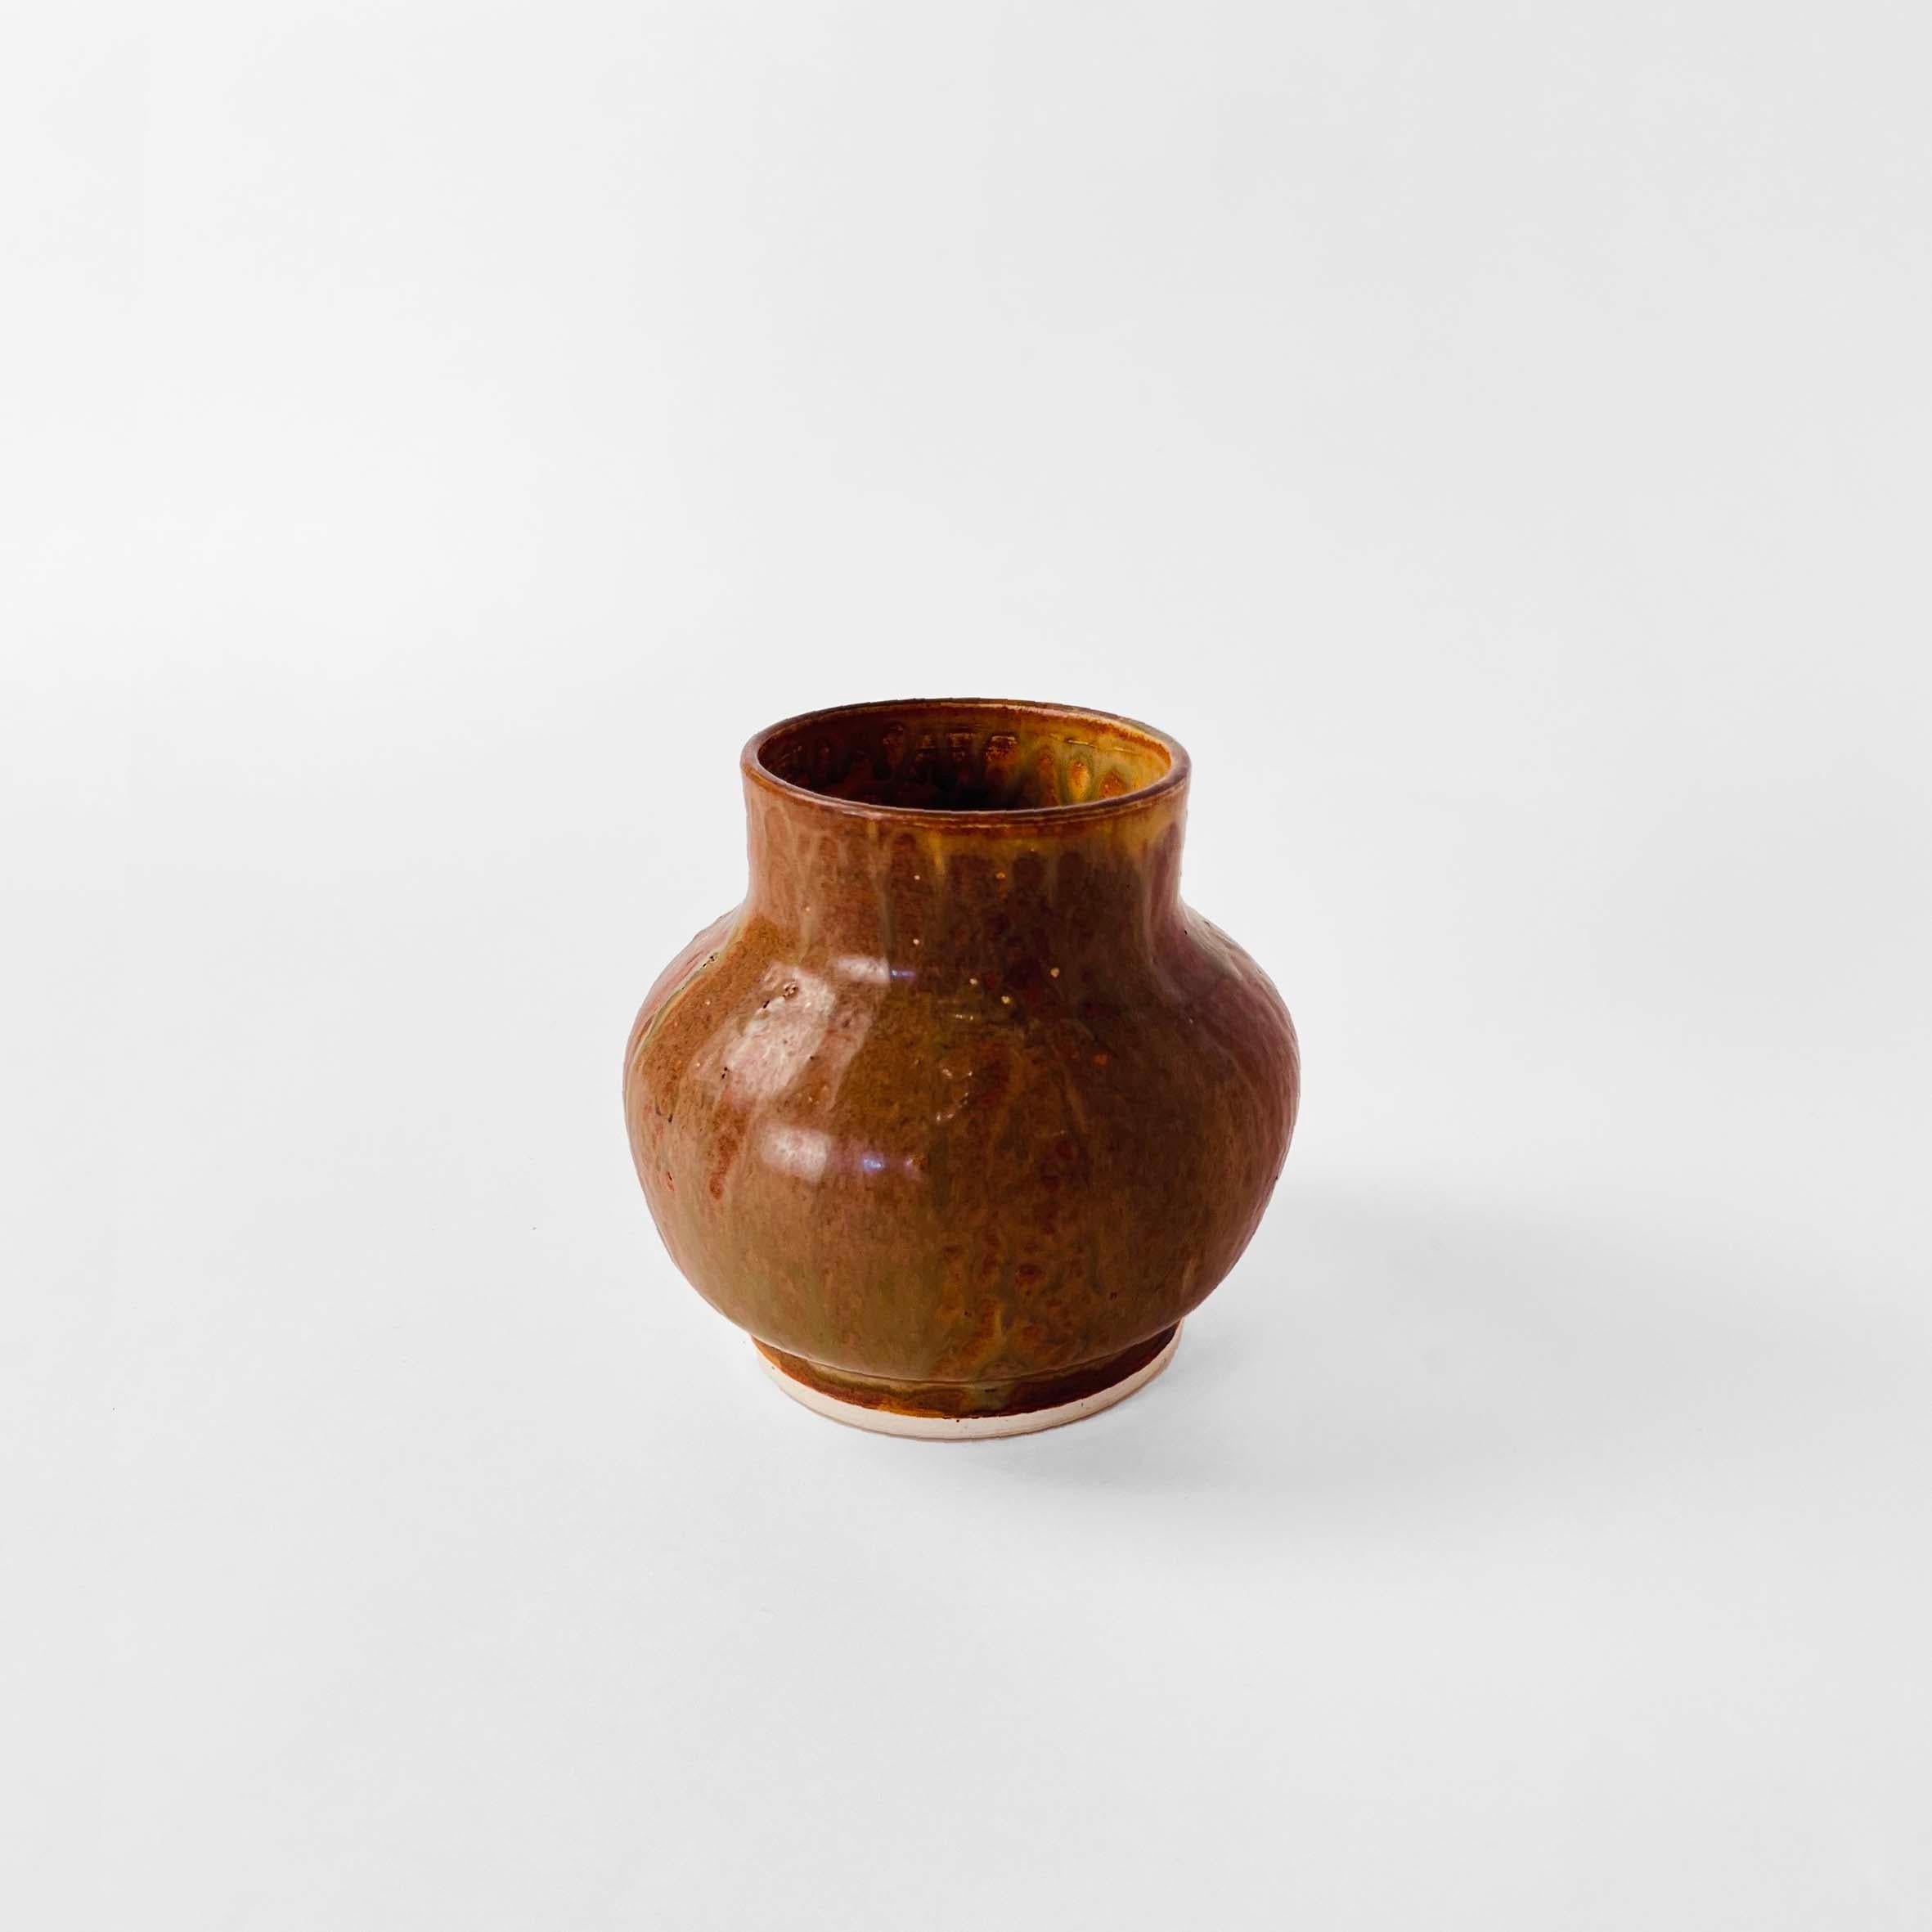 Glazed Wallåkra Dark Brown Vase, Made in Sweden. Paired with a California Pottery Piece For Sale